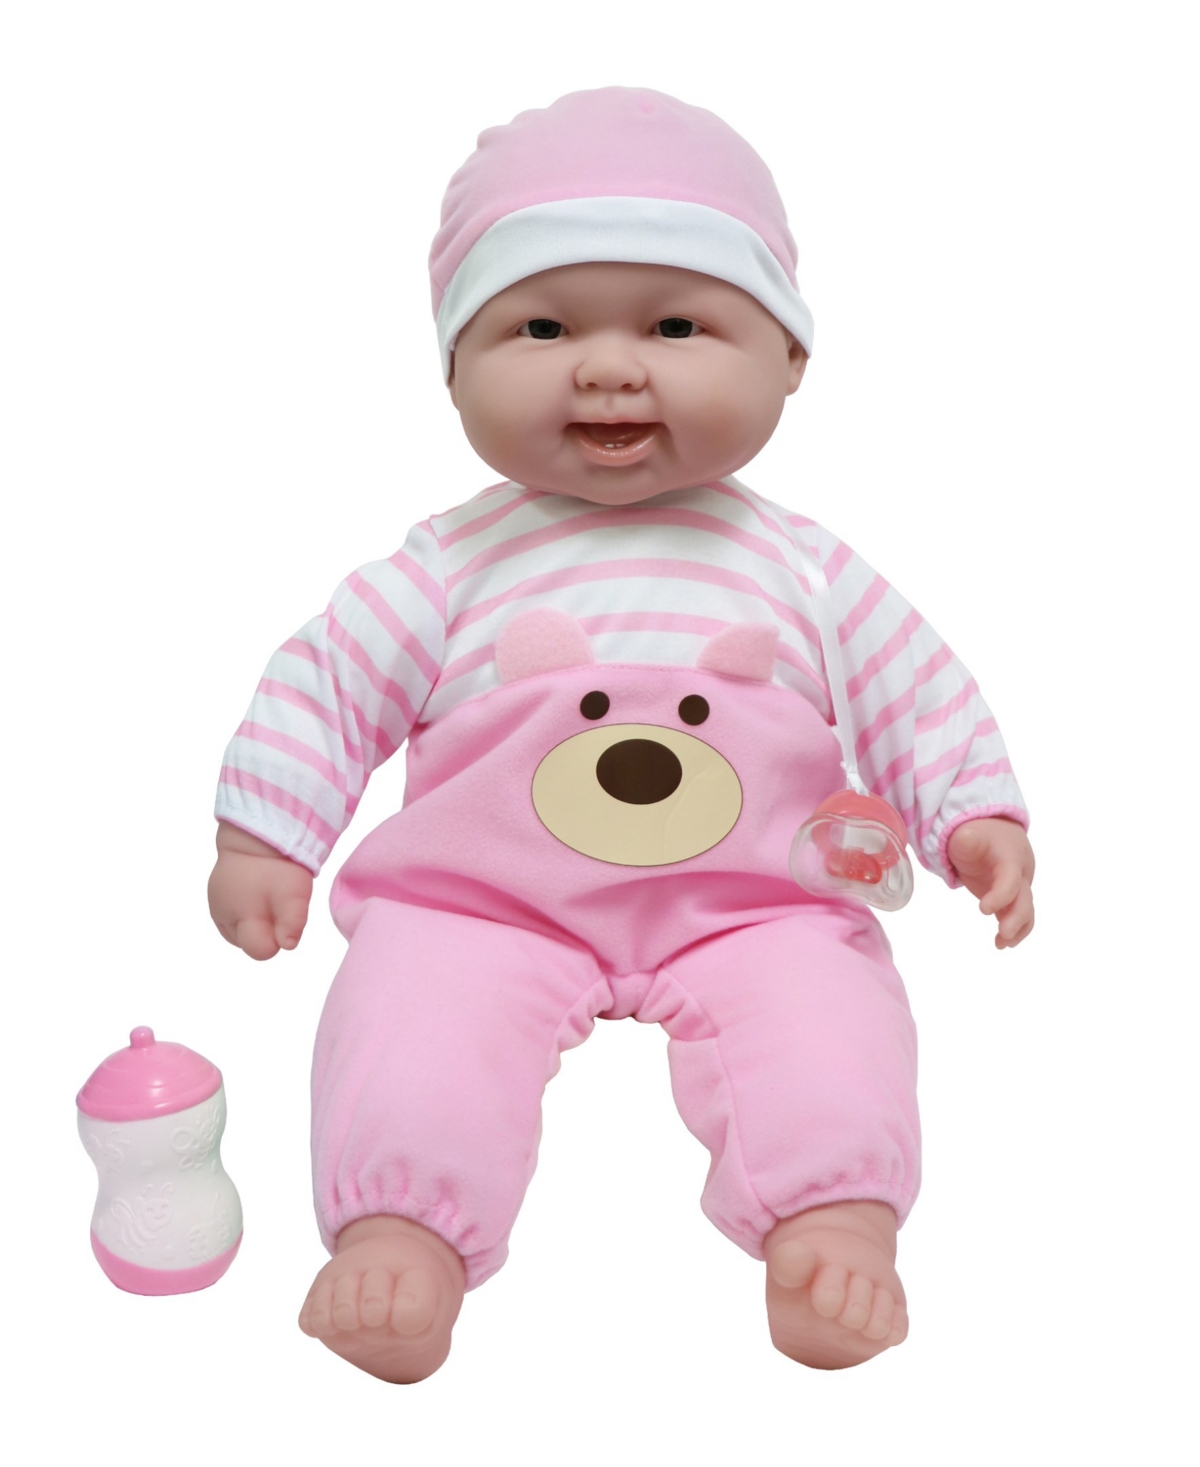 Jc Toys Lots To Cuddle Babies 20" Huggable Baby Doll Pink Outfit In Pink - Caucasian